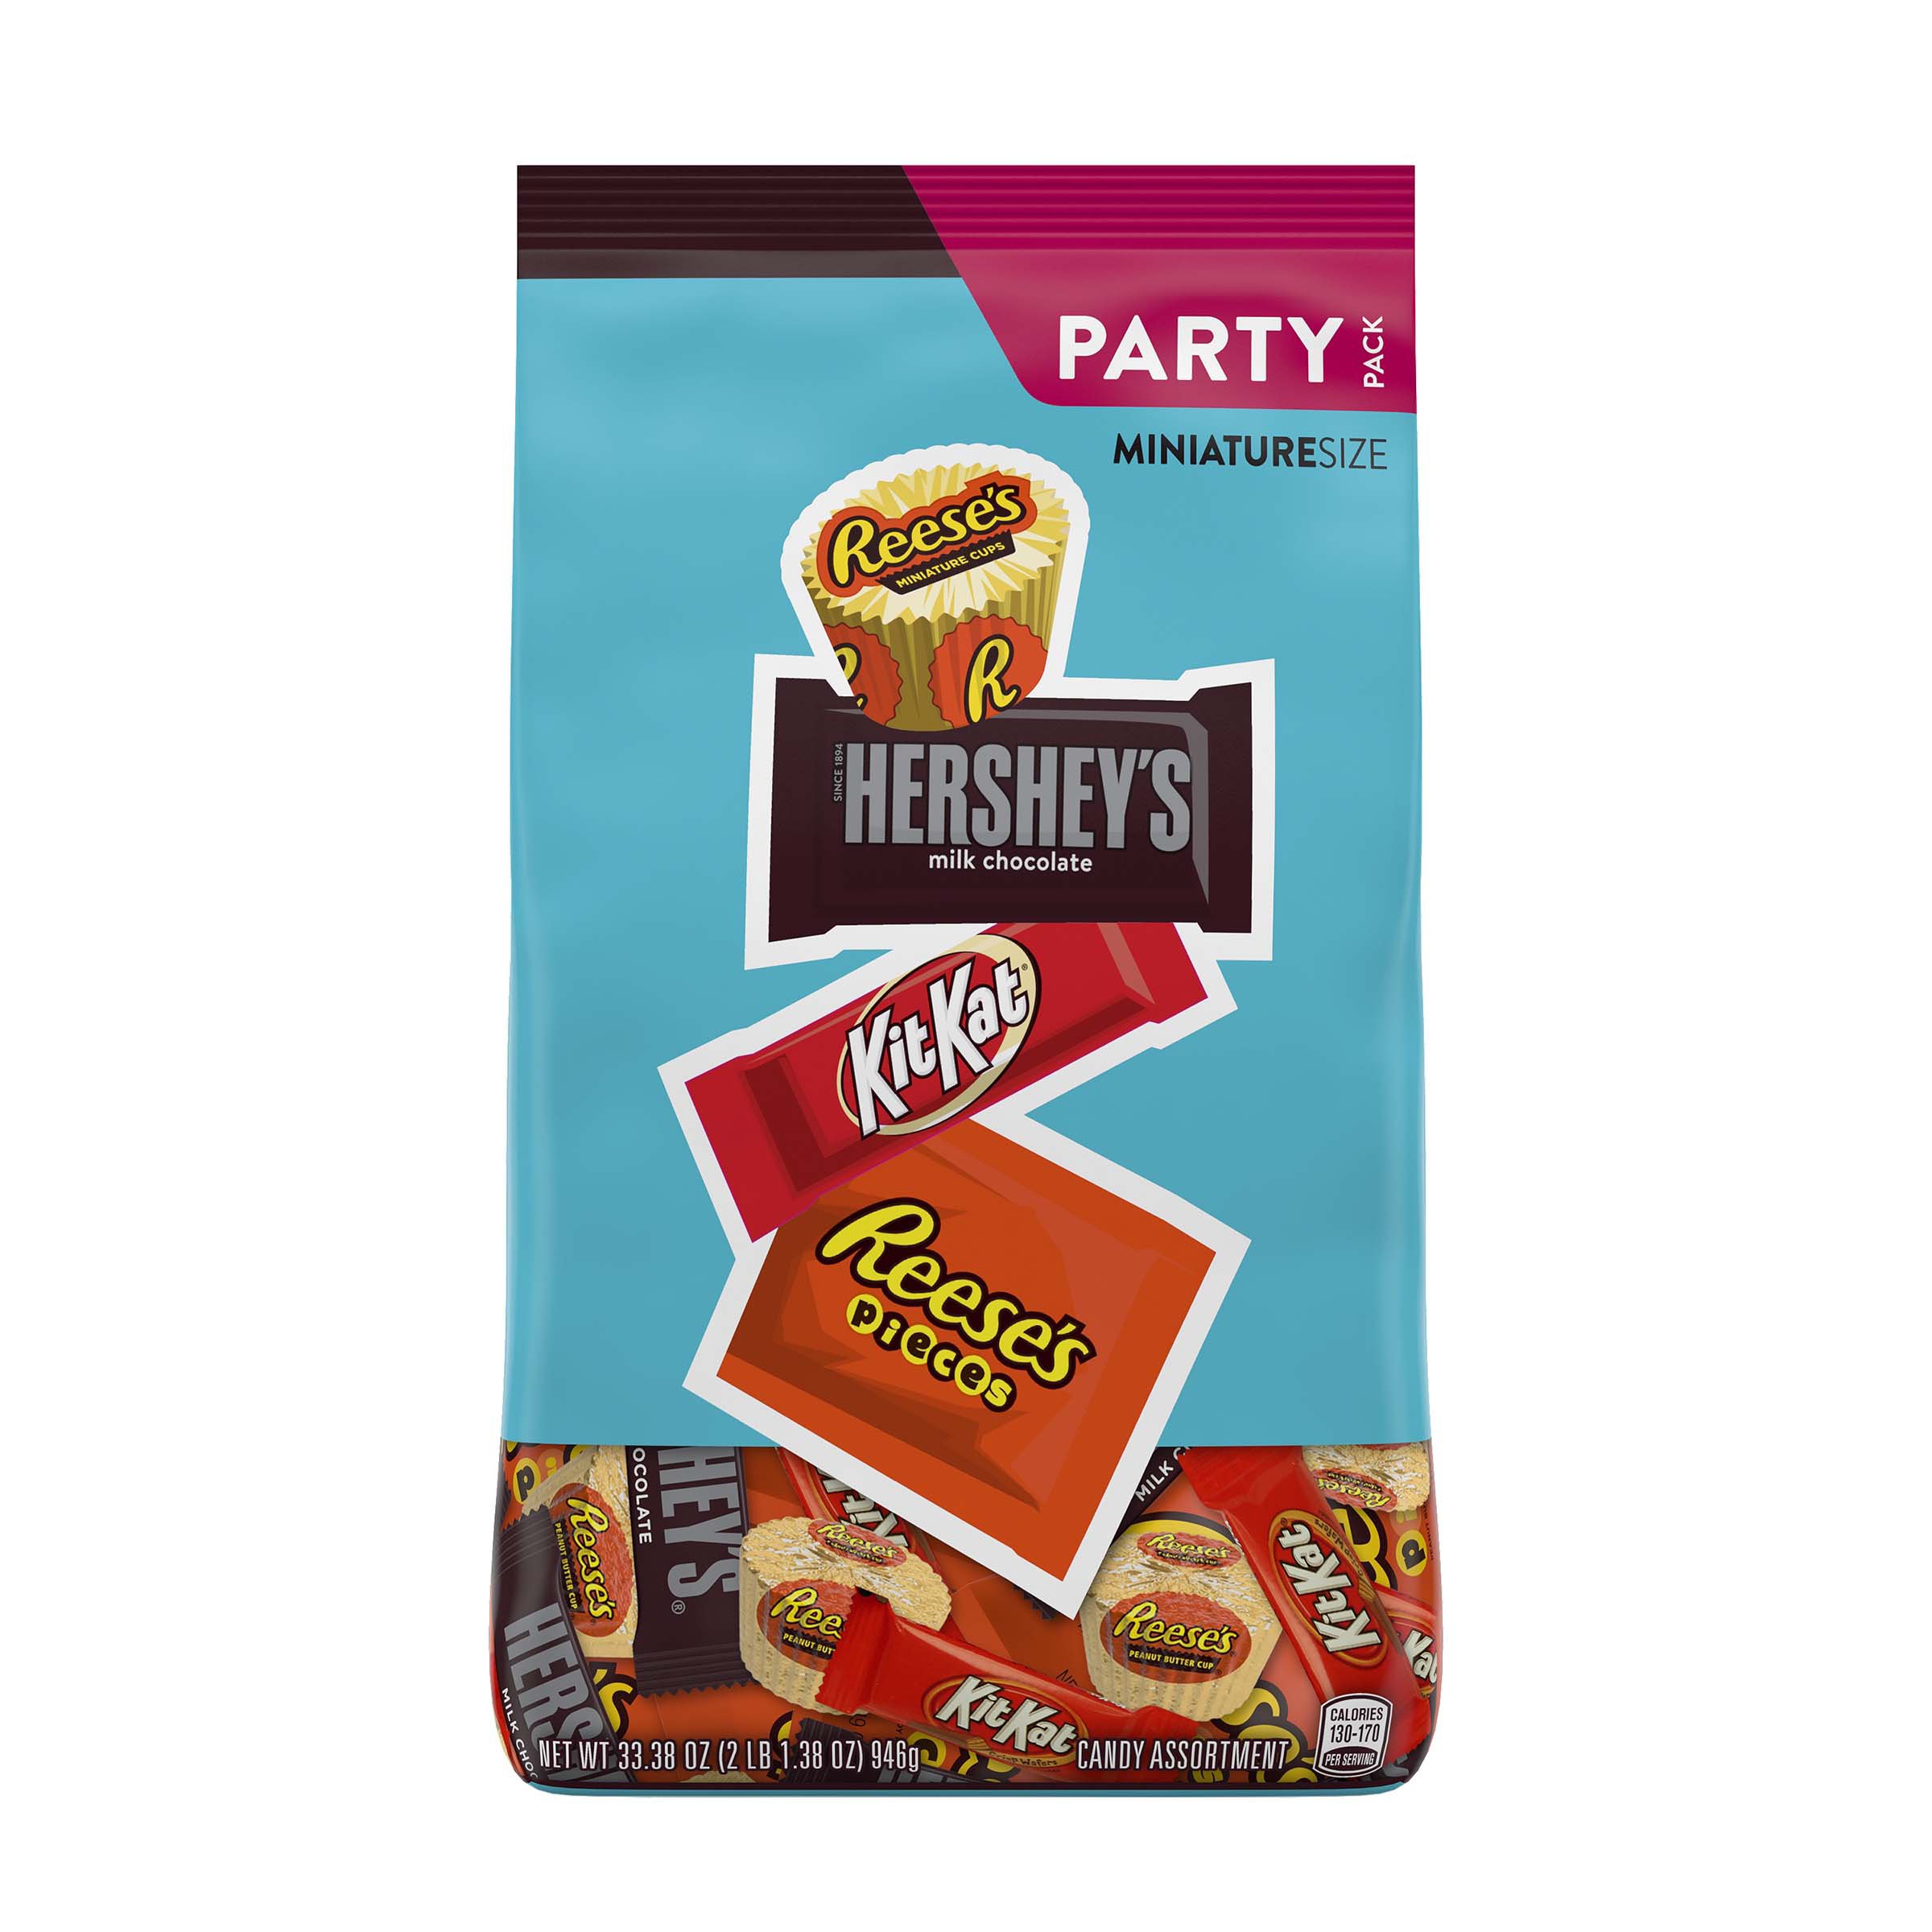 Kitkat Assorted Chocolate Bars Candy, Bulk Pack 3 Pounds